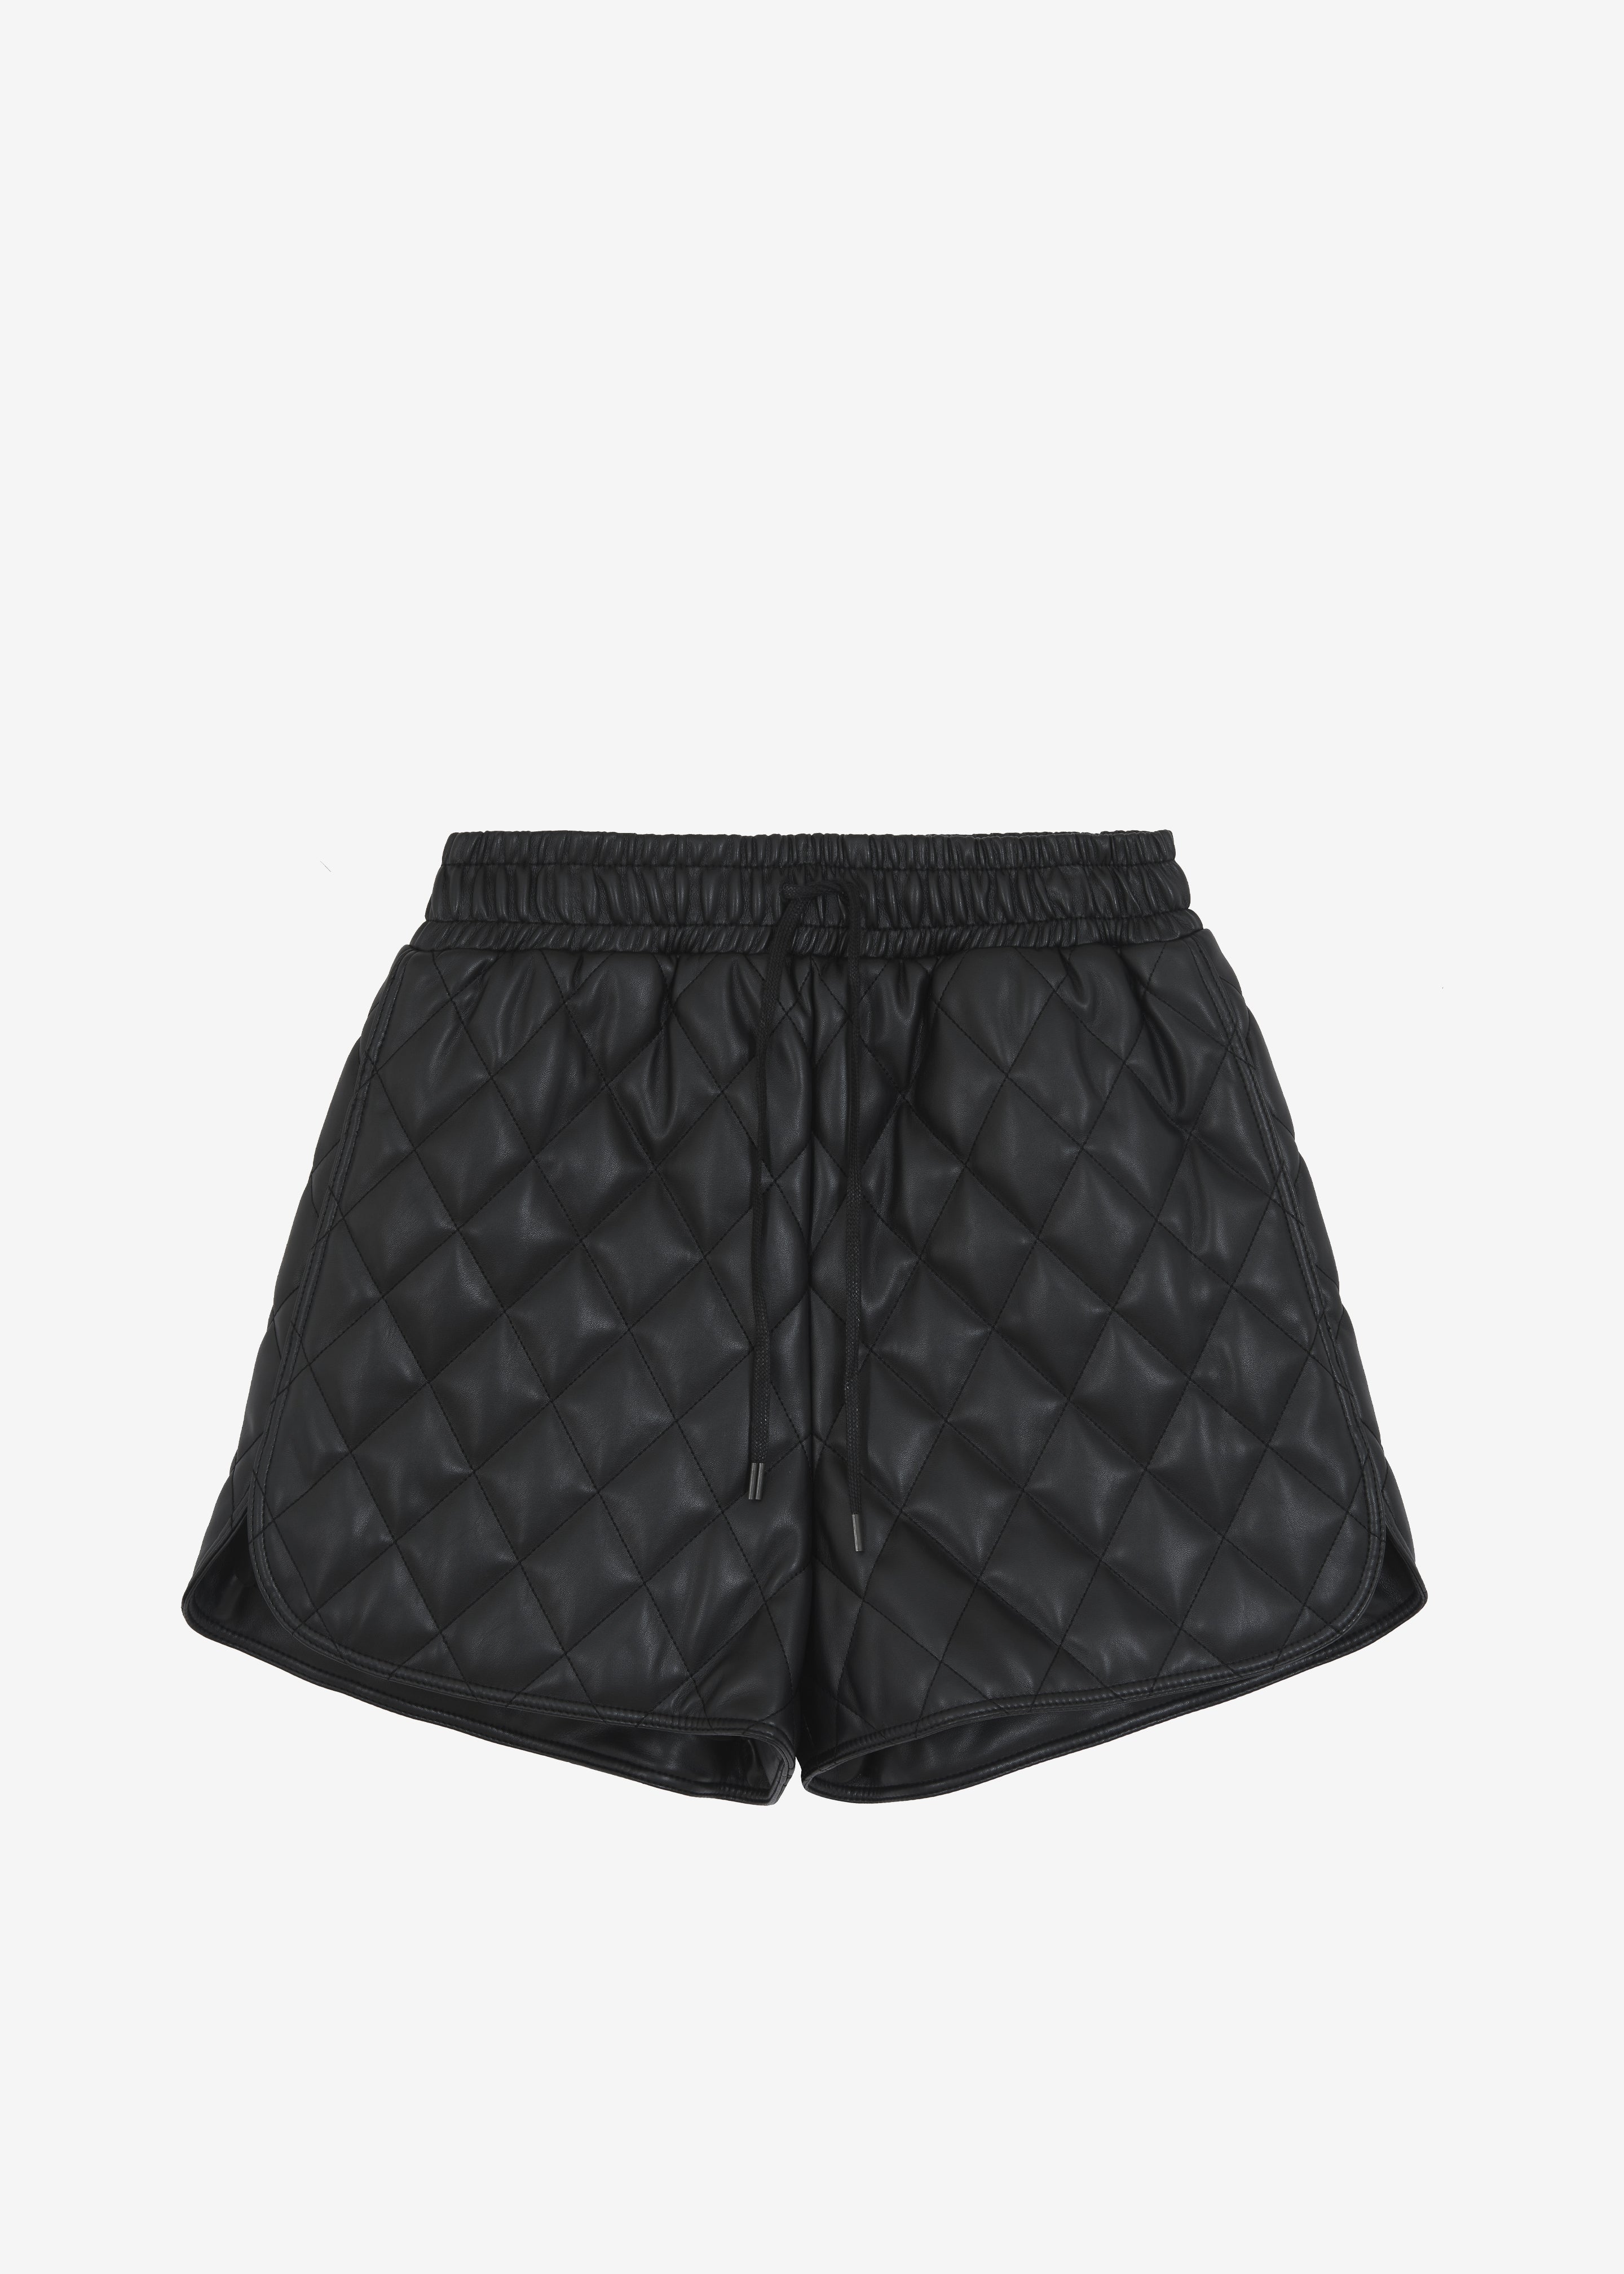 Kingston Faux Leather Quilted Shorts - Black - 11